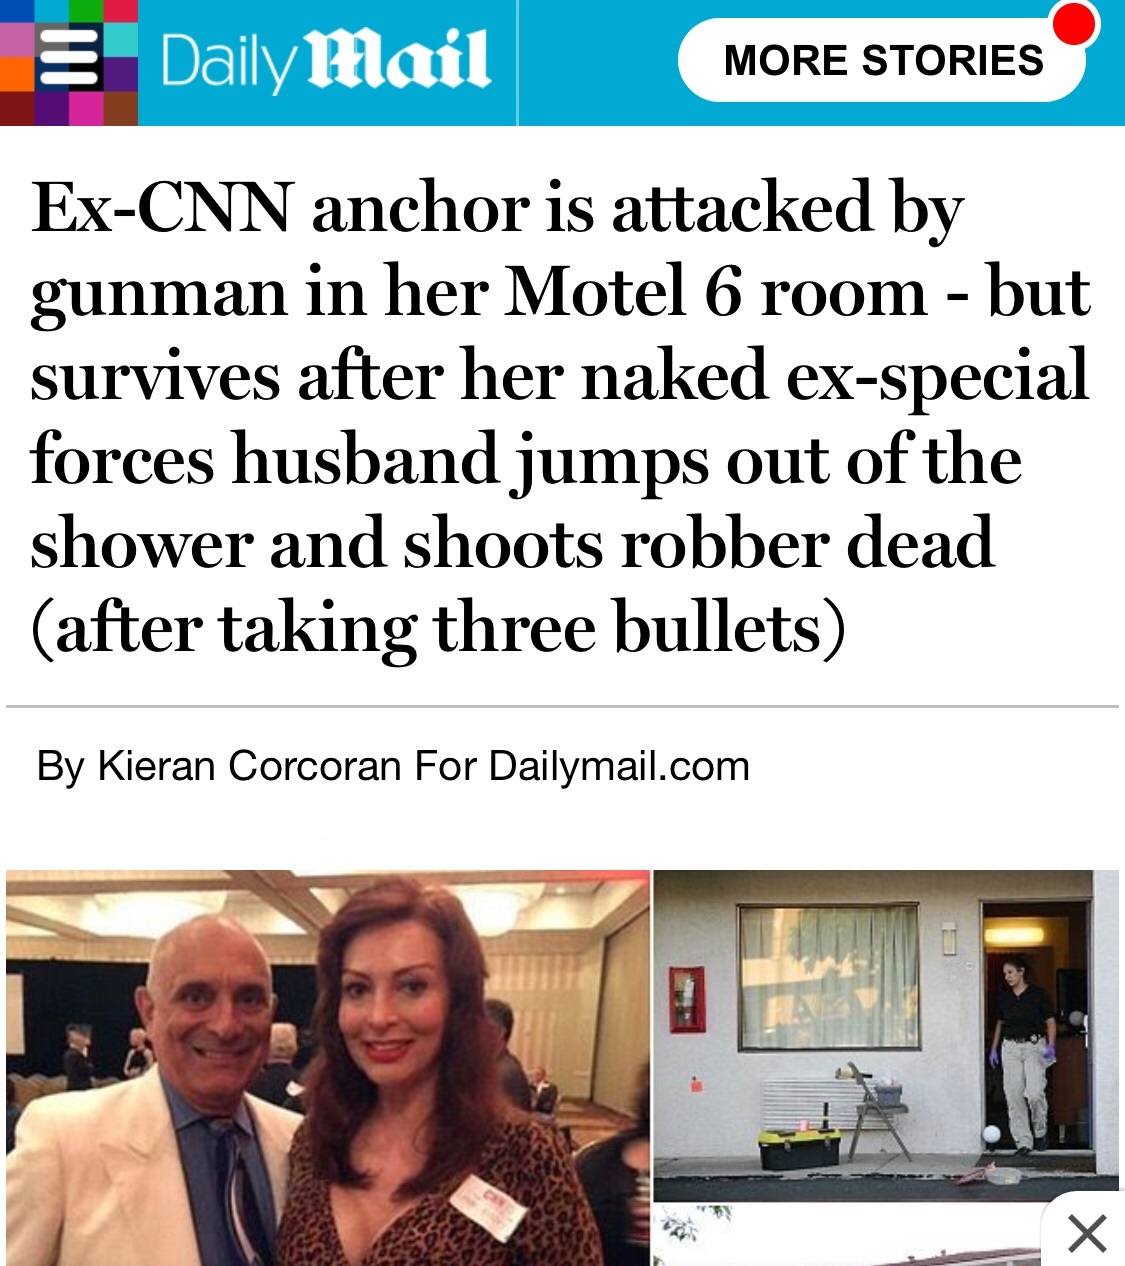 memes - media - Daily Mail More Stories ExCnn anchor is attacked by gunman in her Motel 6 room but survives after her naked exspecial forces husband jumps out of the shower and shoots robber dead after taking three bullets By Kieran Corcoran For Dailymail